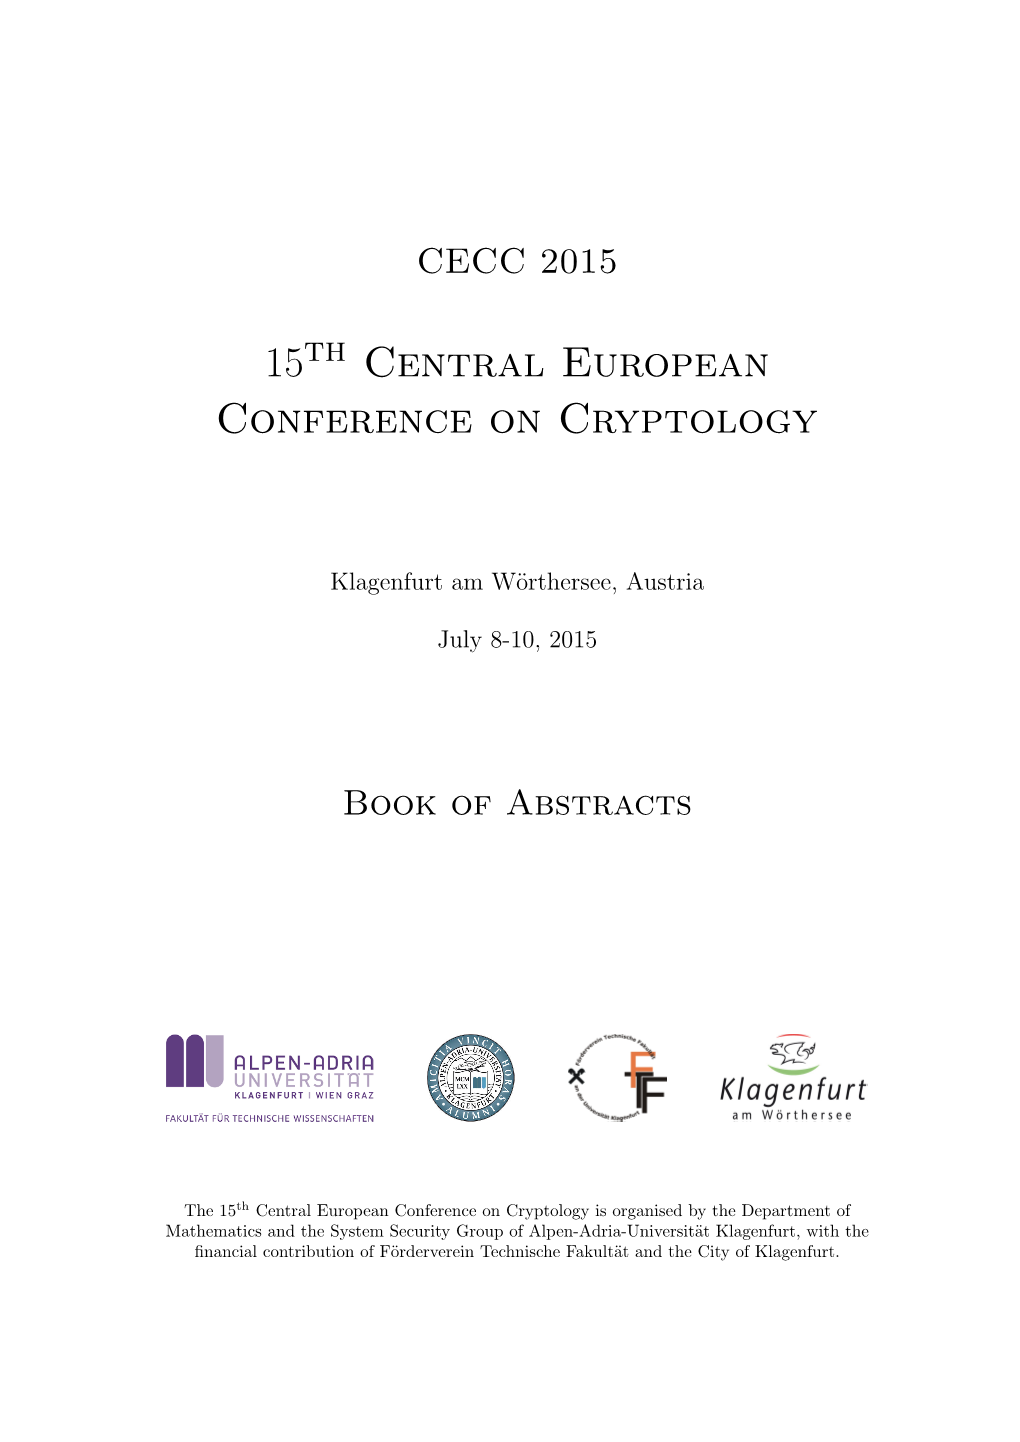 15Th Central European Conference on Cryptology